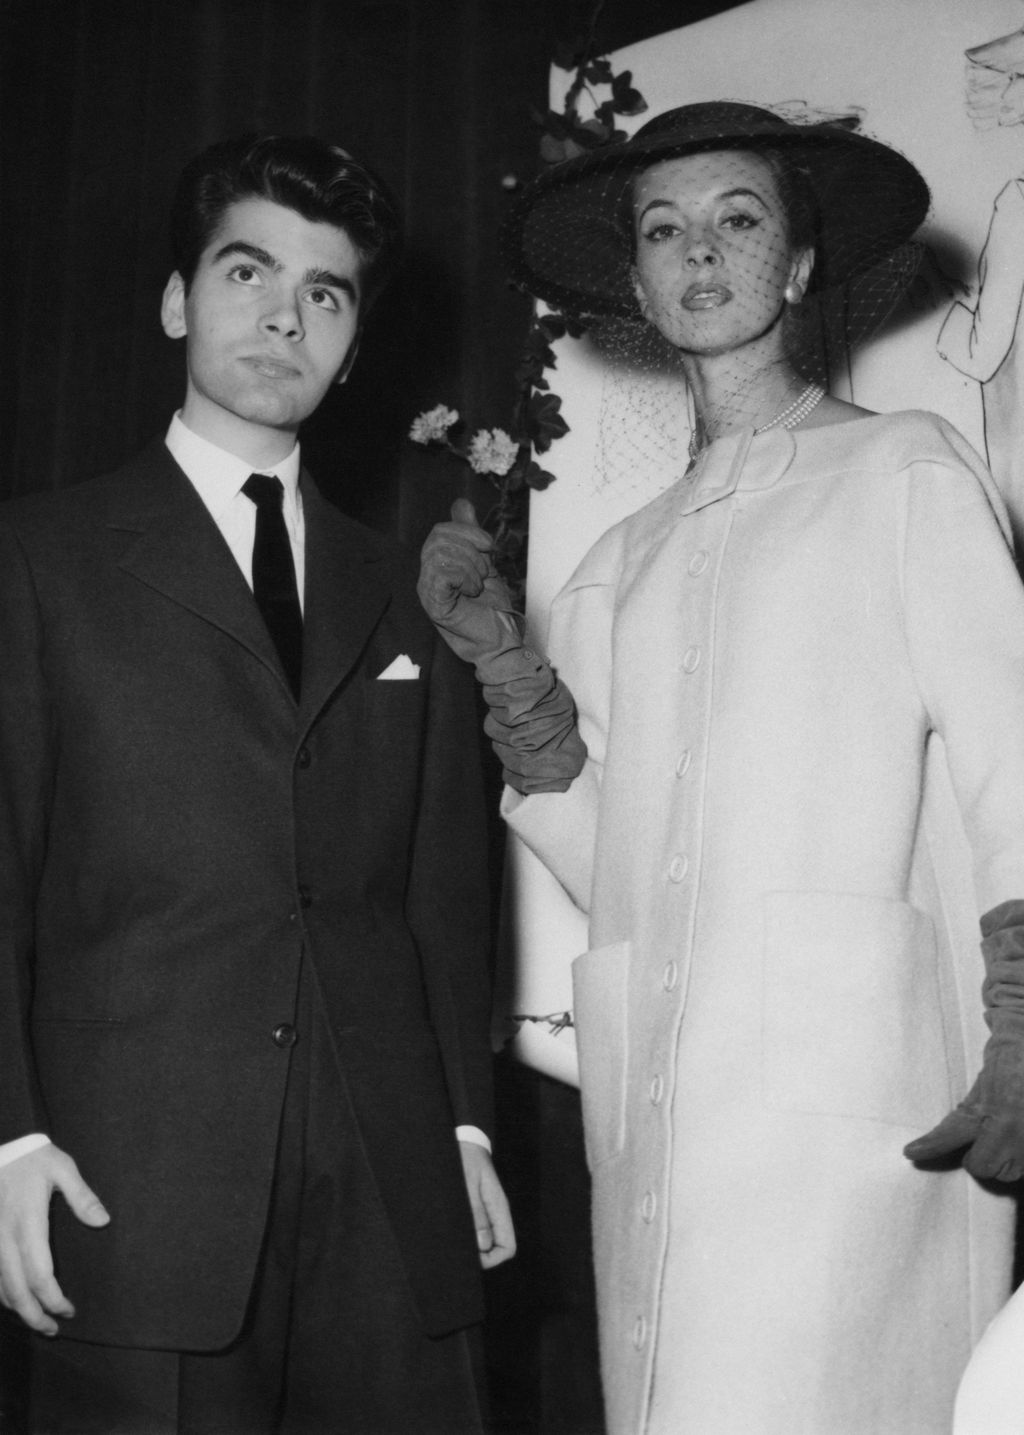 German fashion designer Karl Lagerfeld after winning the coats category in a design competition sponsored by the International Wool Secretariat, Paris, 14th December 1954. With him is a model wearing his design. The competition win led to Lagerfeld being hired as assistant to Pierre Balmain. (Photo by Keystone/Hulton Archive/Getty Images)